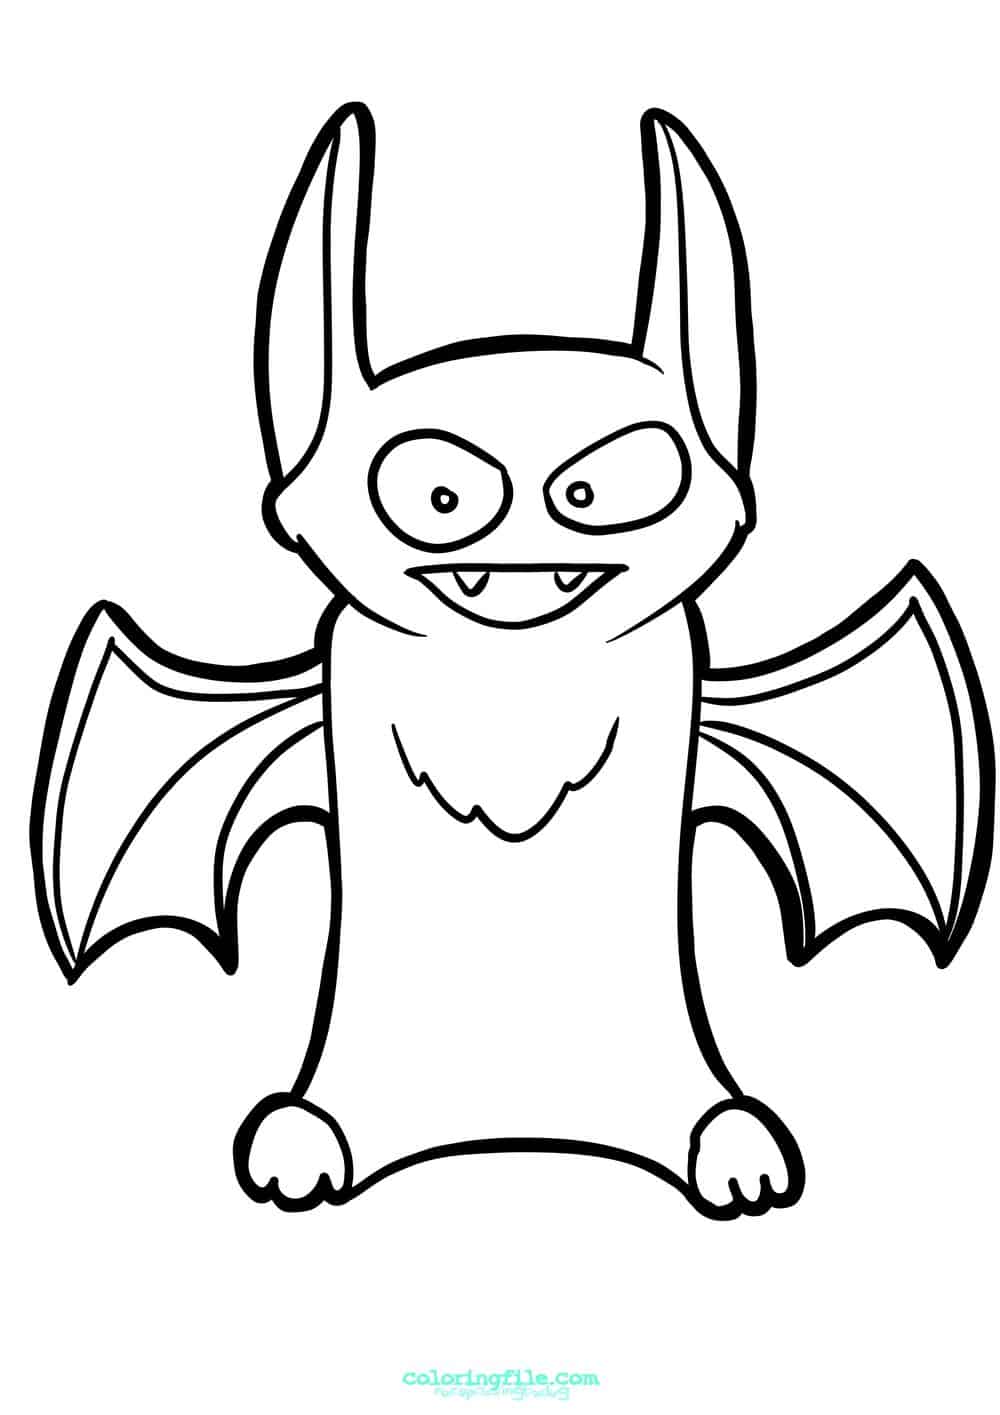 Cute halloween bat coloring pages